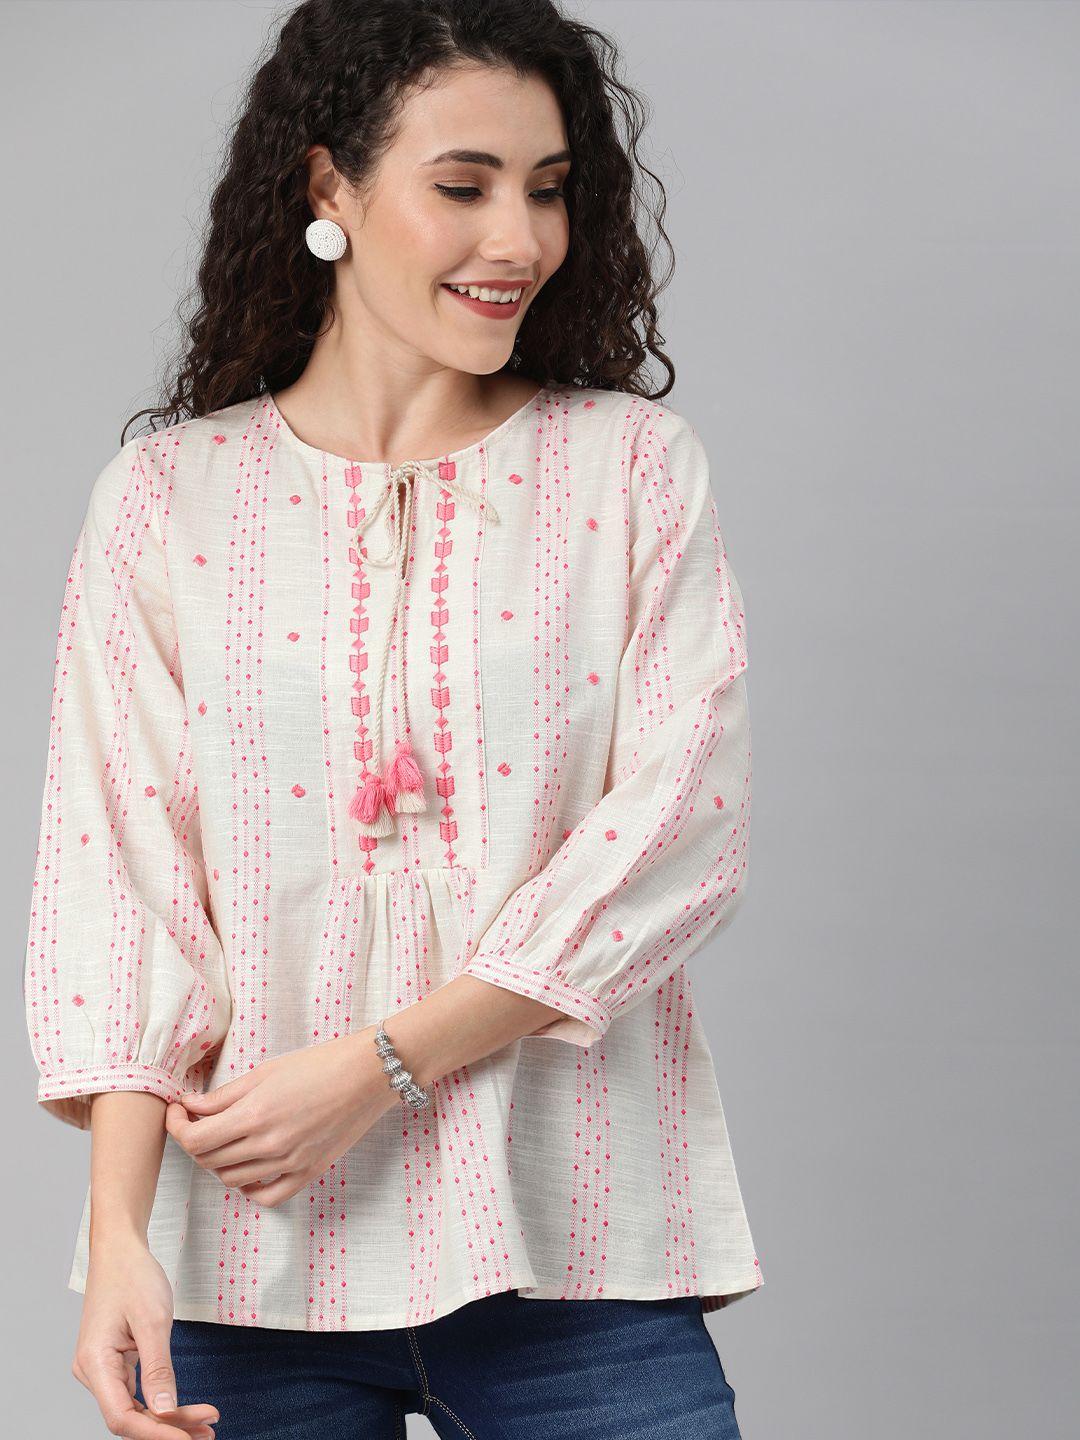 global-desi-off-white-&-pink-cotton-geometric-self-design-tie-up-neck-a-line-top